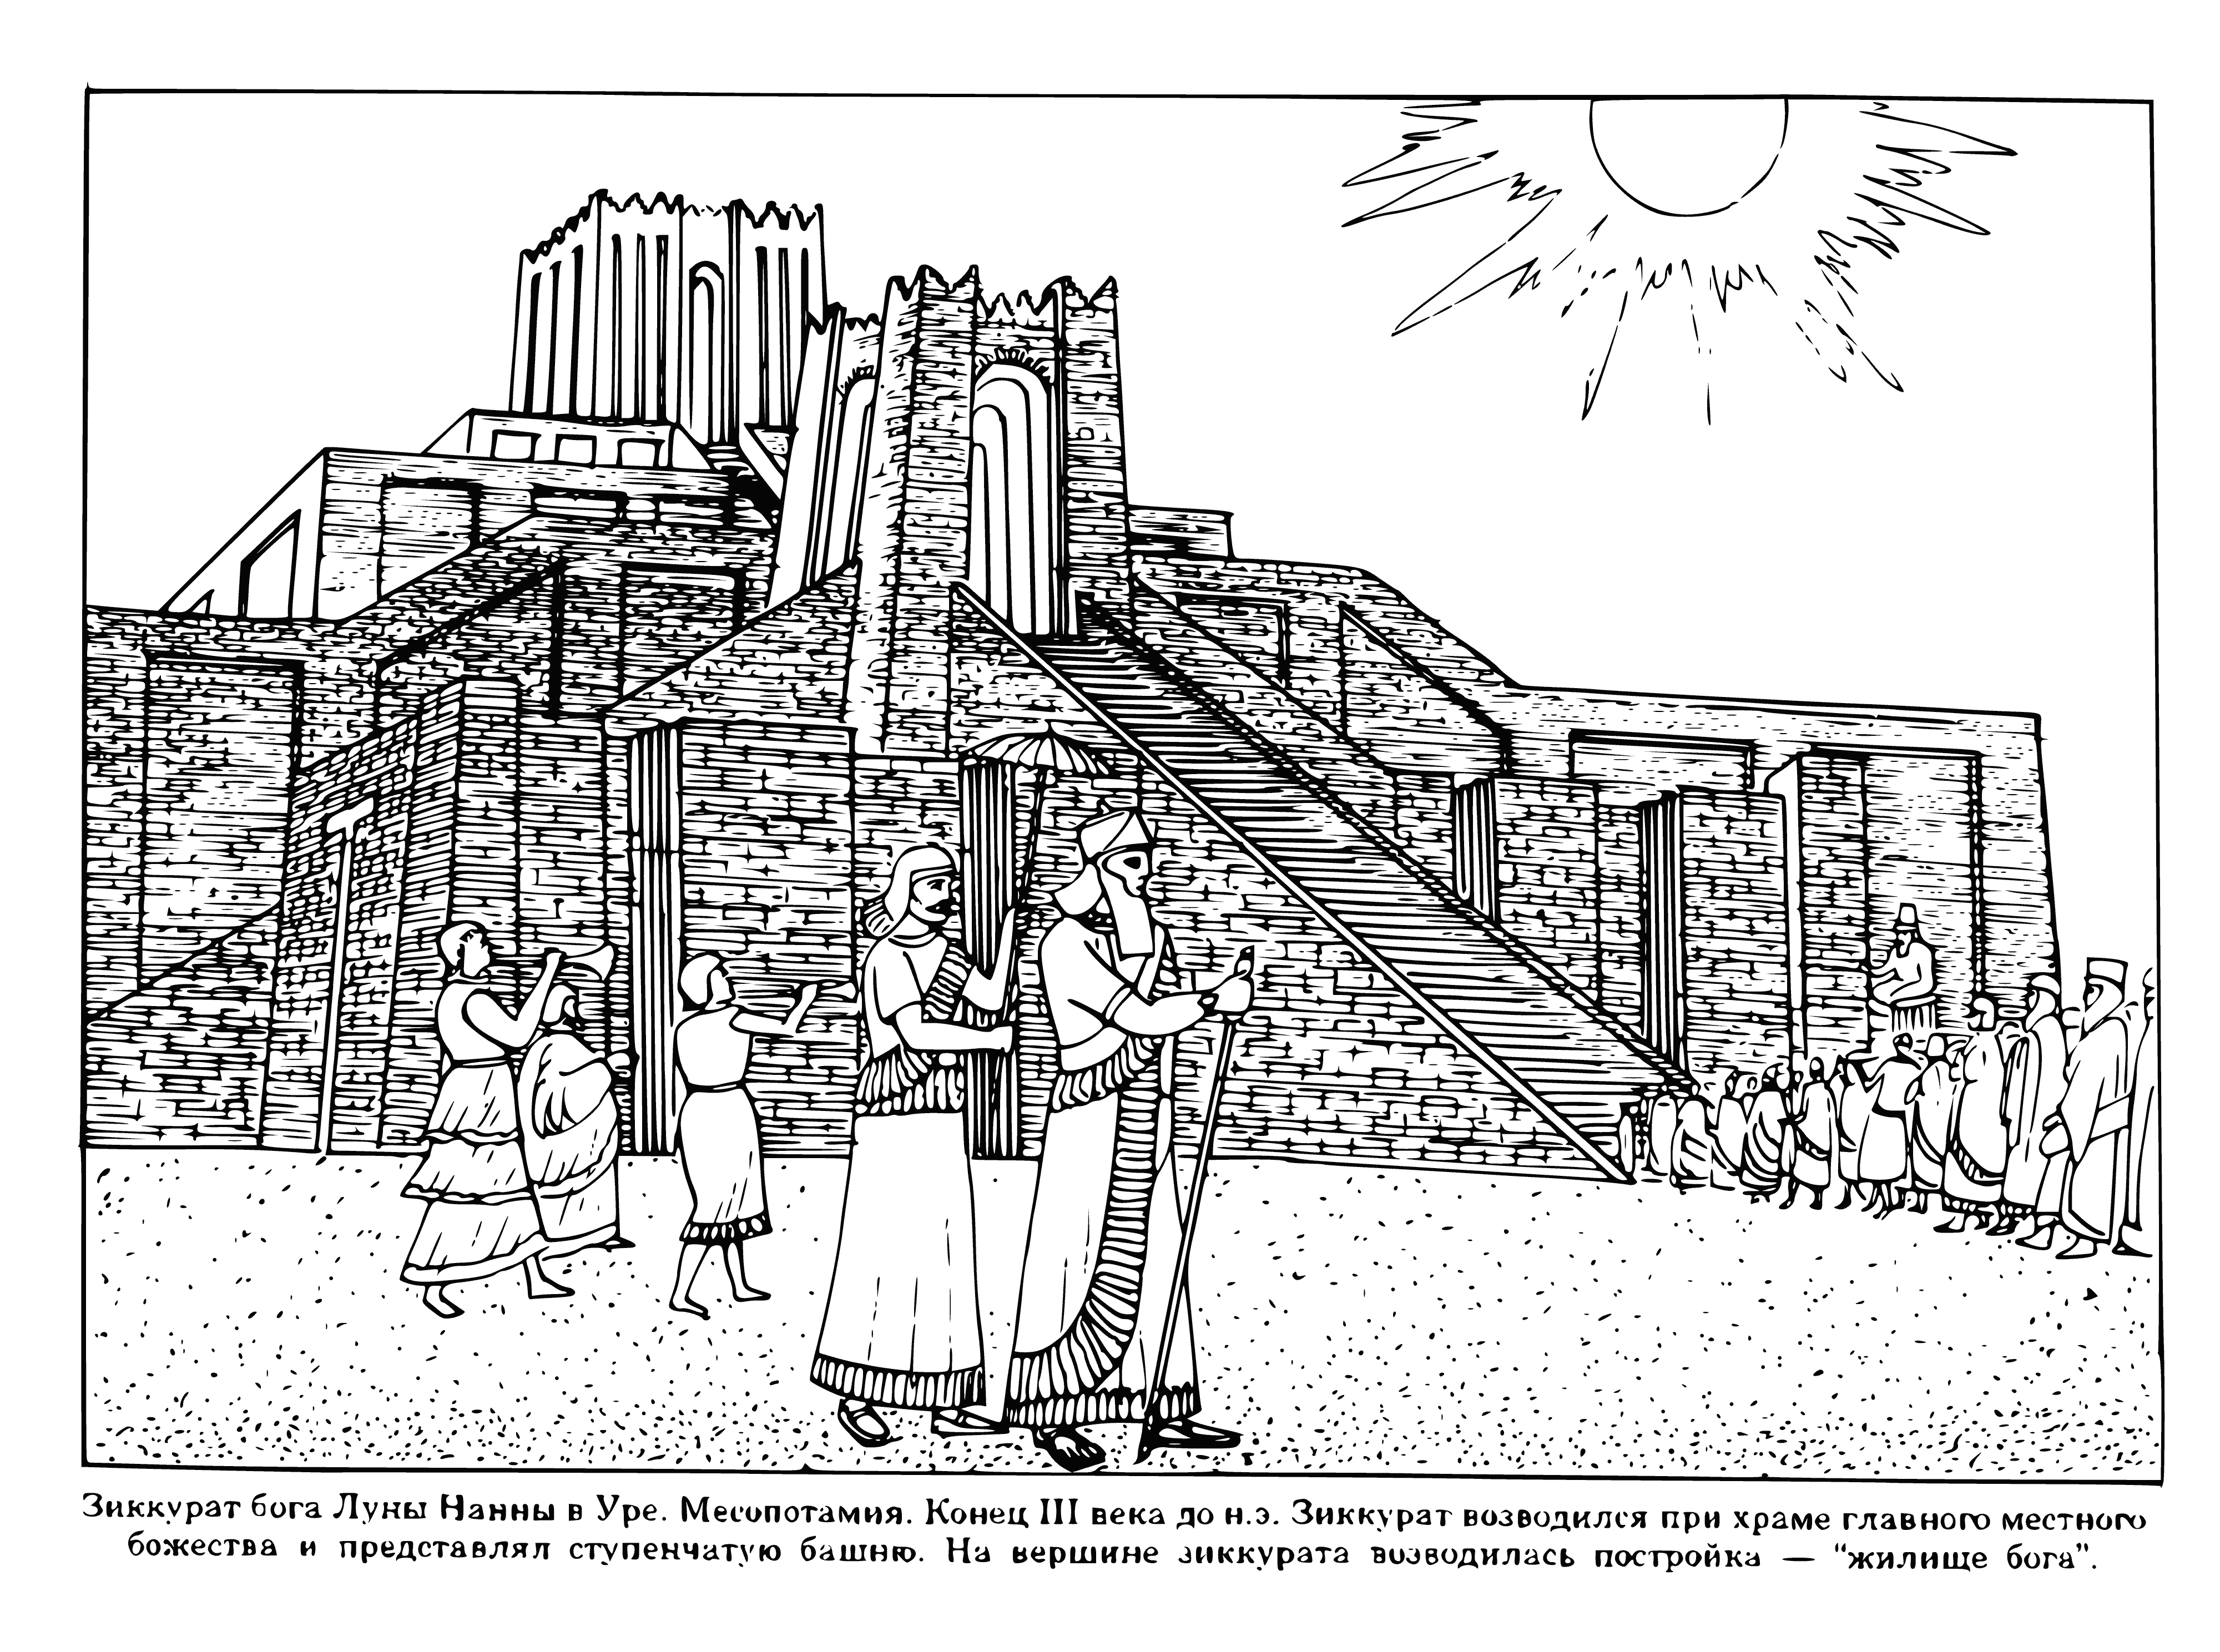 coloring page: A large Ziggurat with a staircase stands in the middle of desert-like land in this coloring page with no people or animals. It's a temple dedicated to the moon deity in the ancient world.